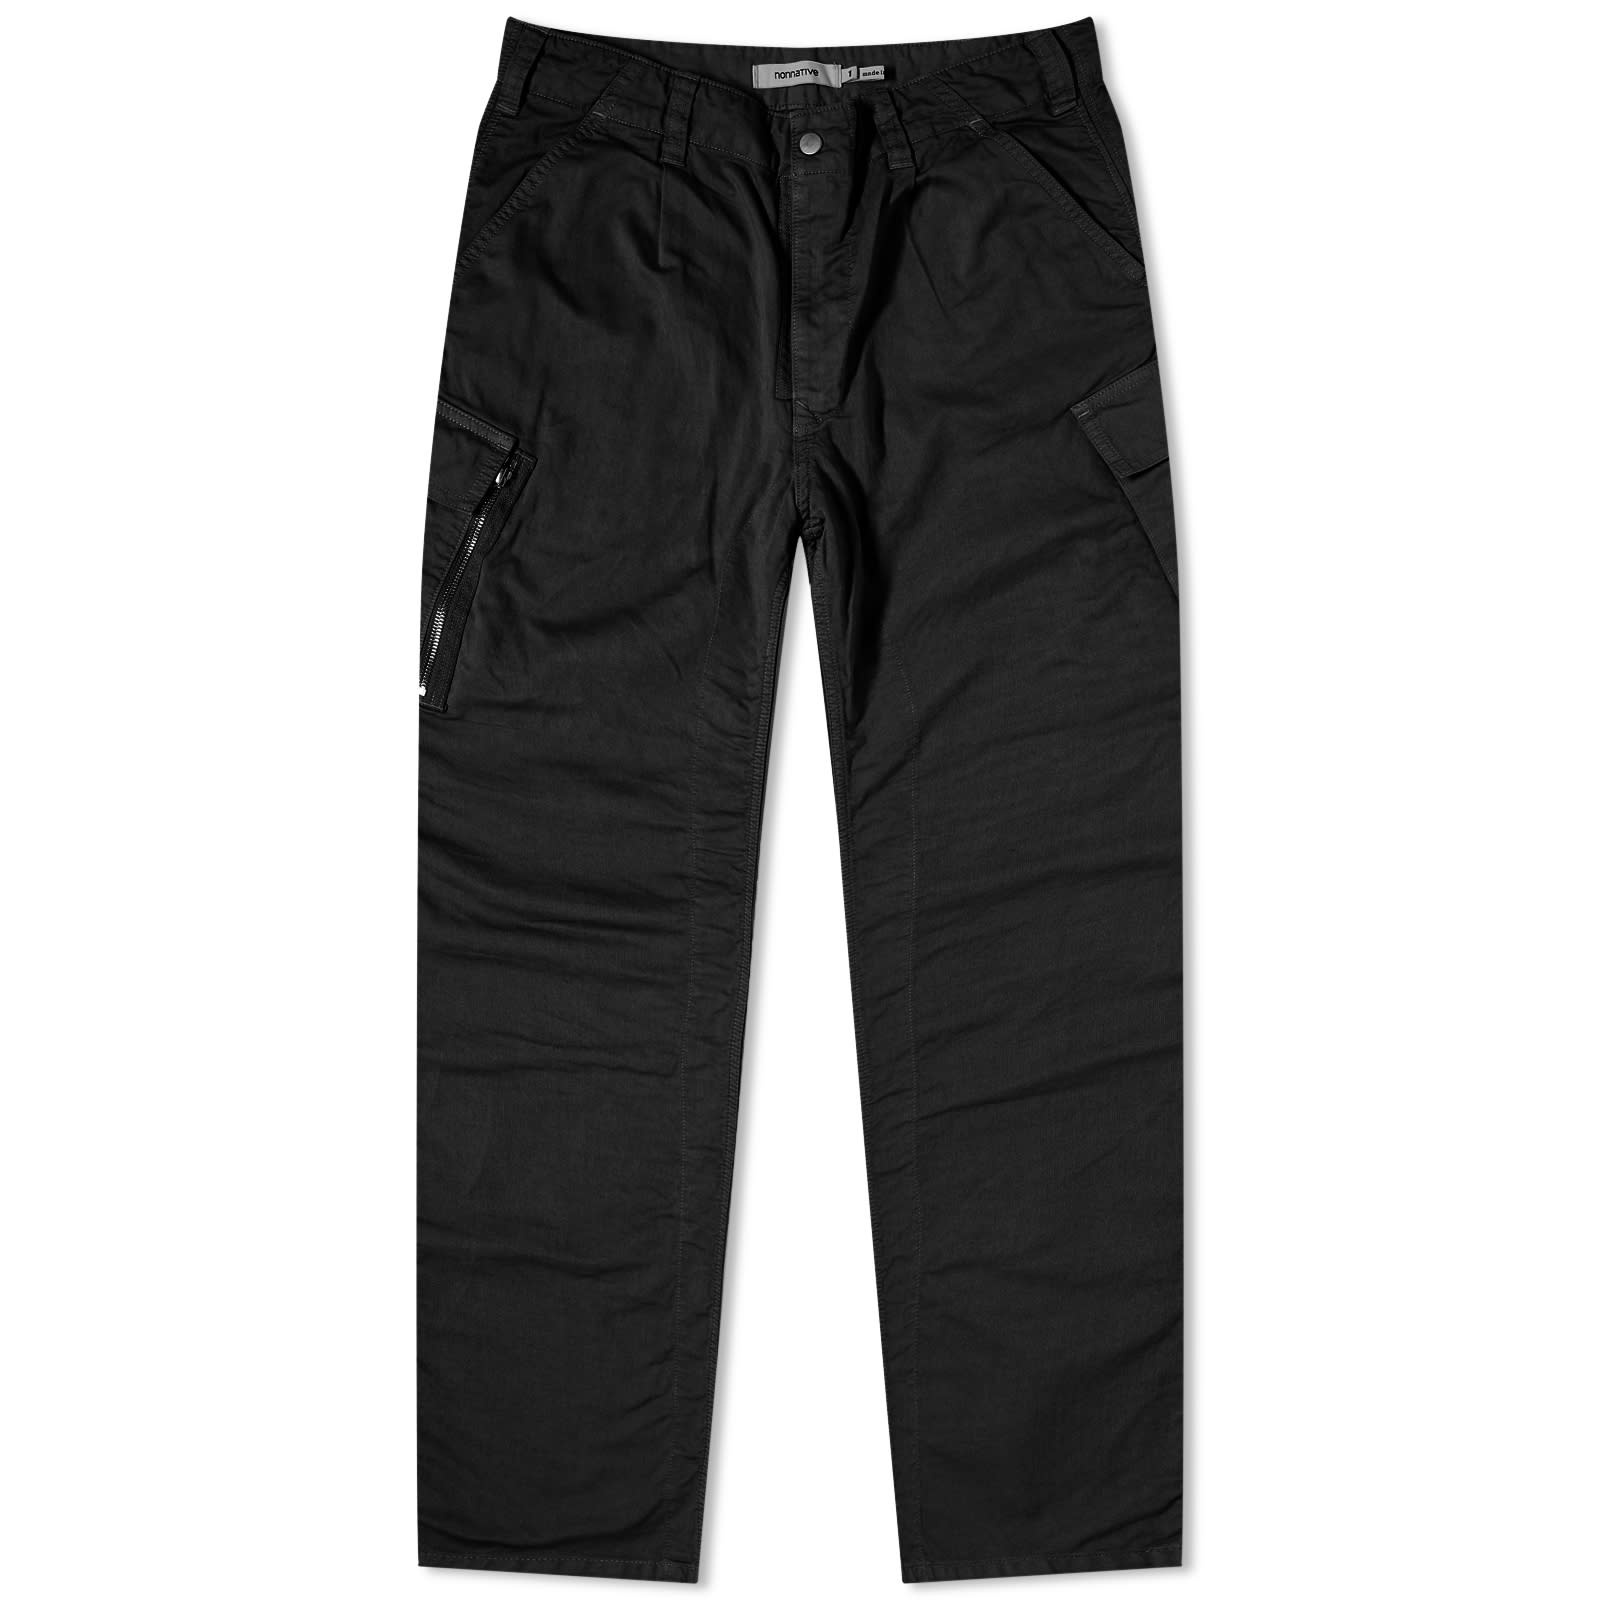 Nonnative Overdyed 6 Pocket Soldier Pants - 1